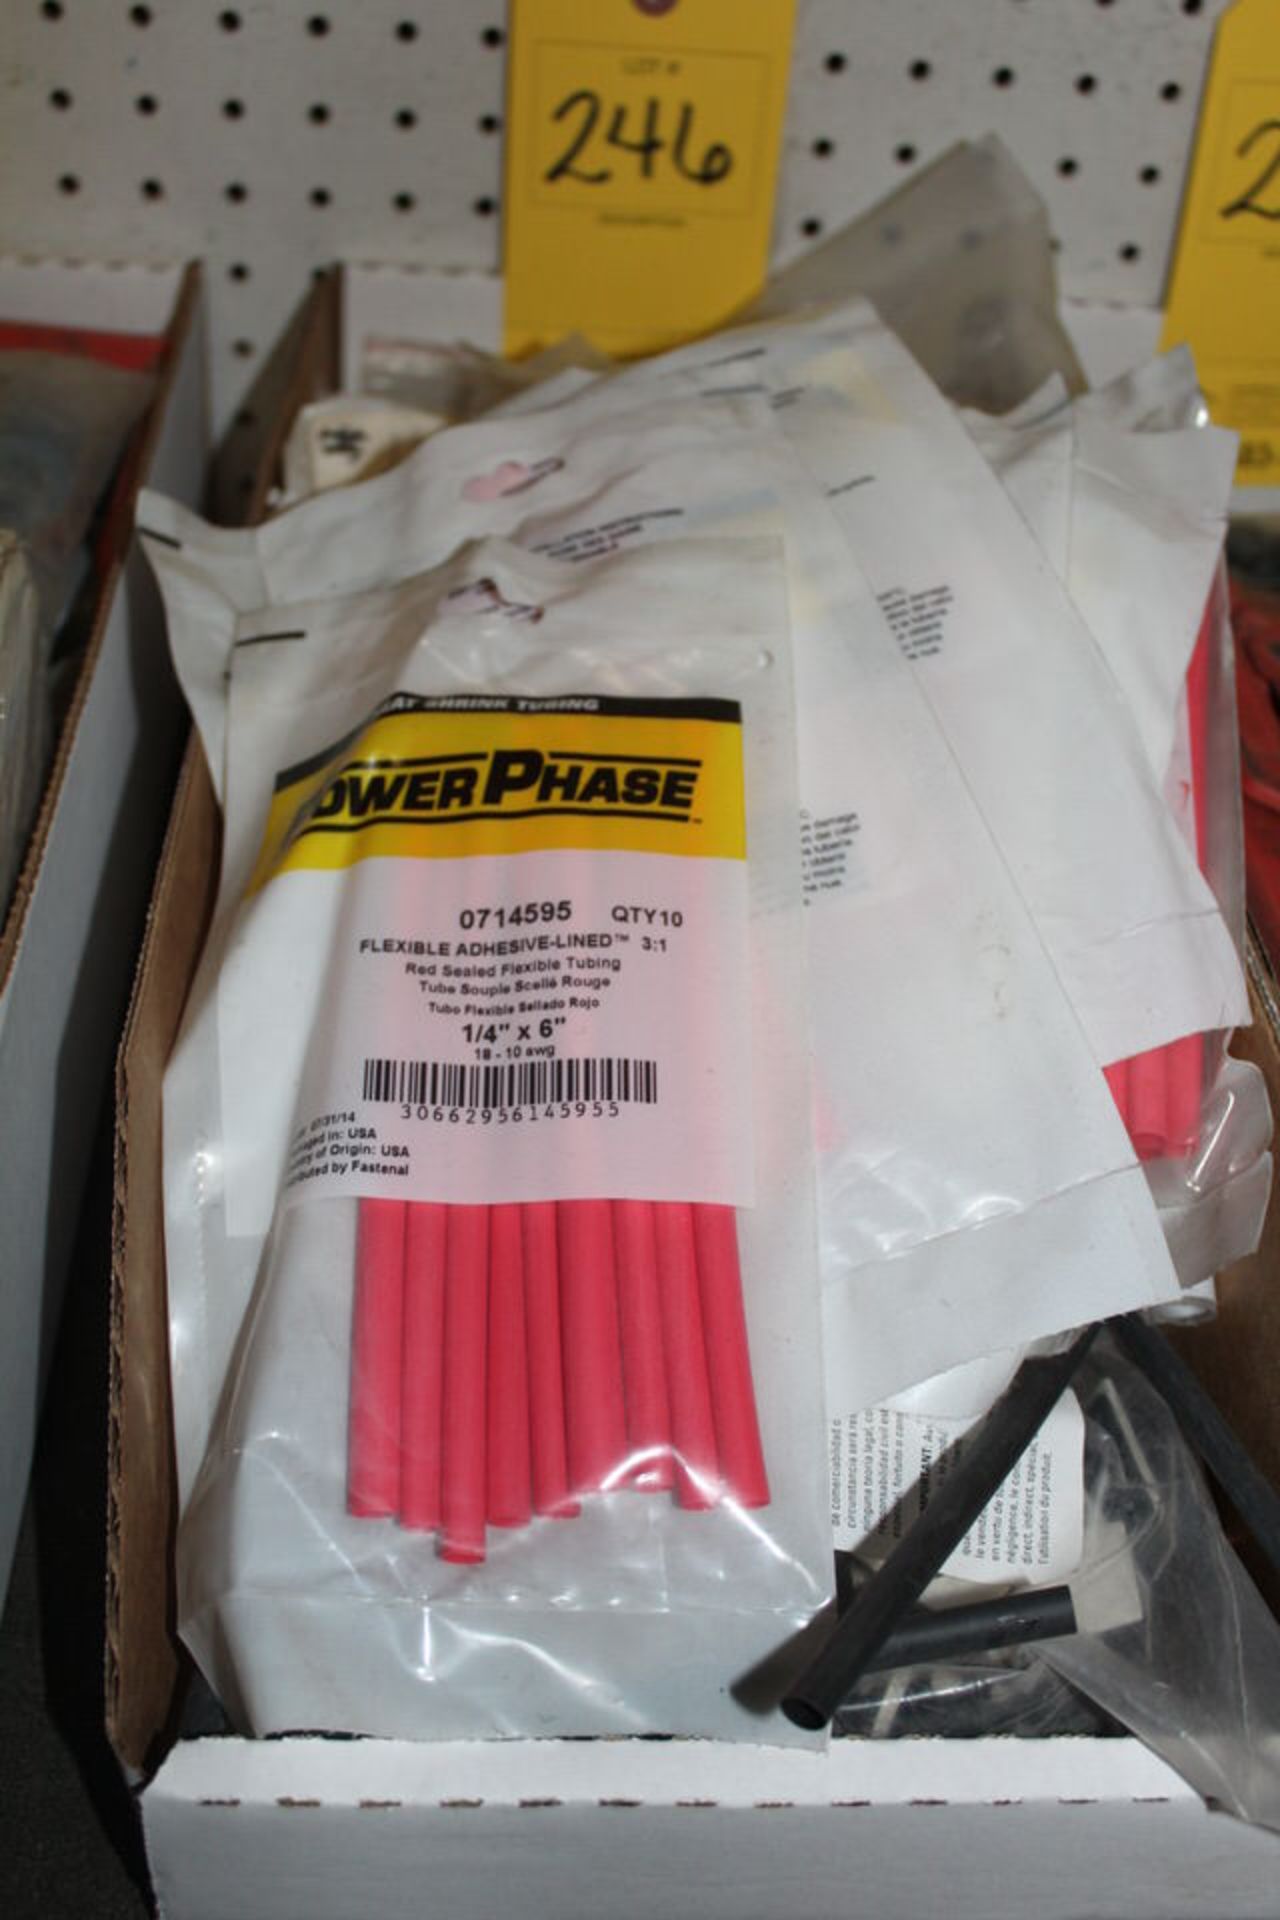 ASST PLASTIC INSULATING TUBEING ** Located: 1700 West 2nd St, Odessa, TX 79763 **